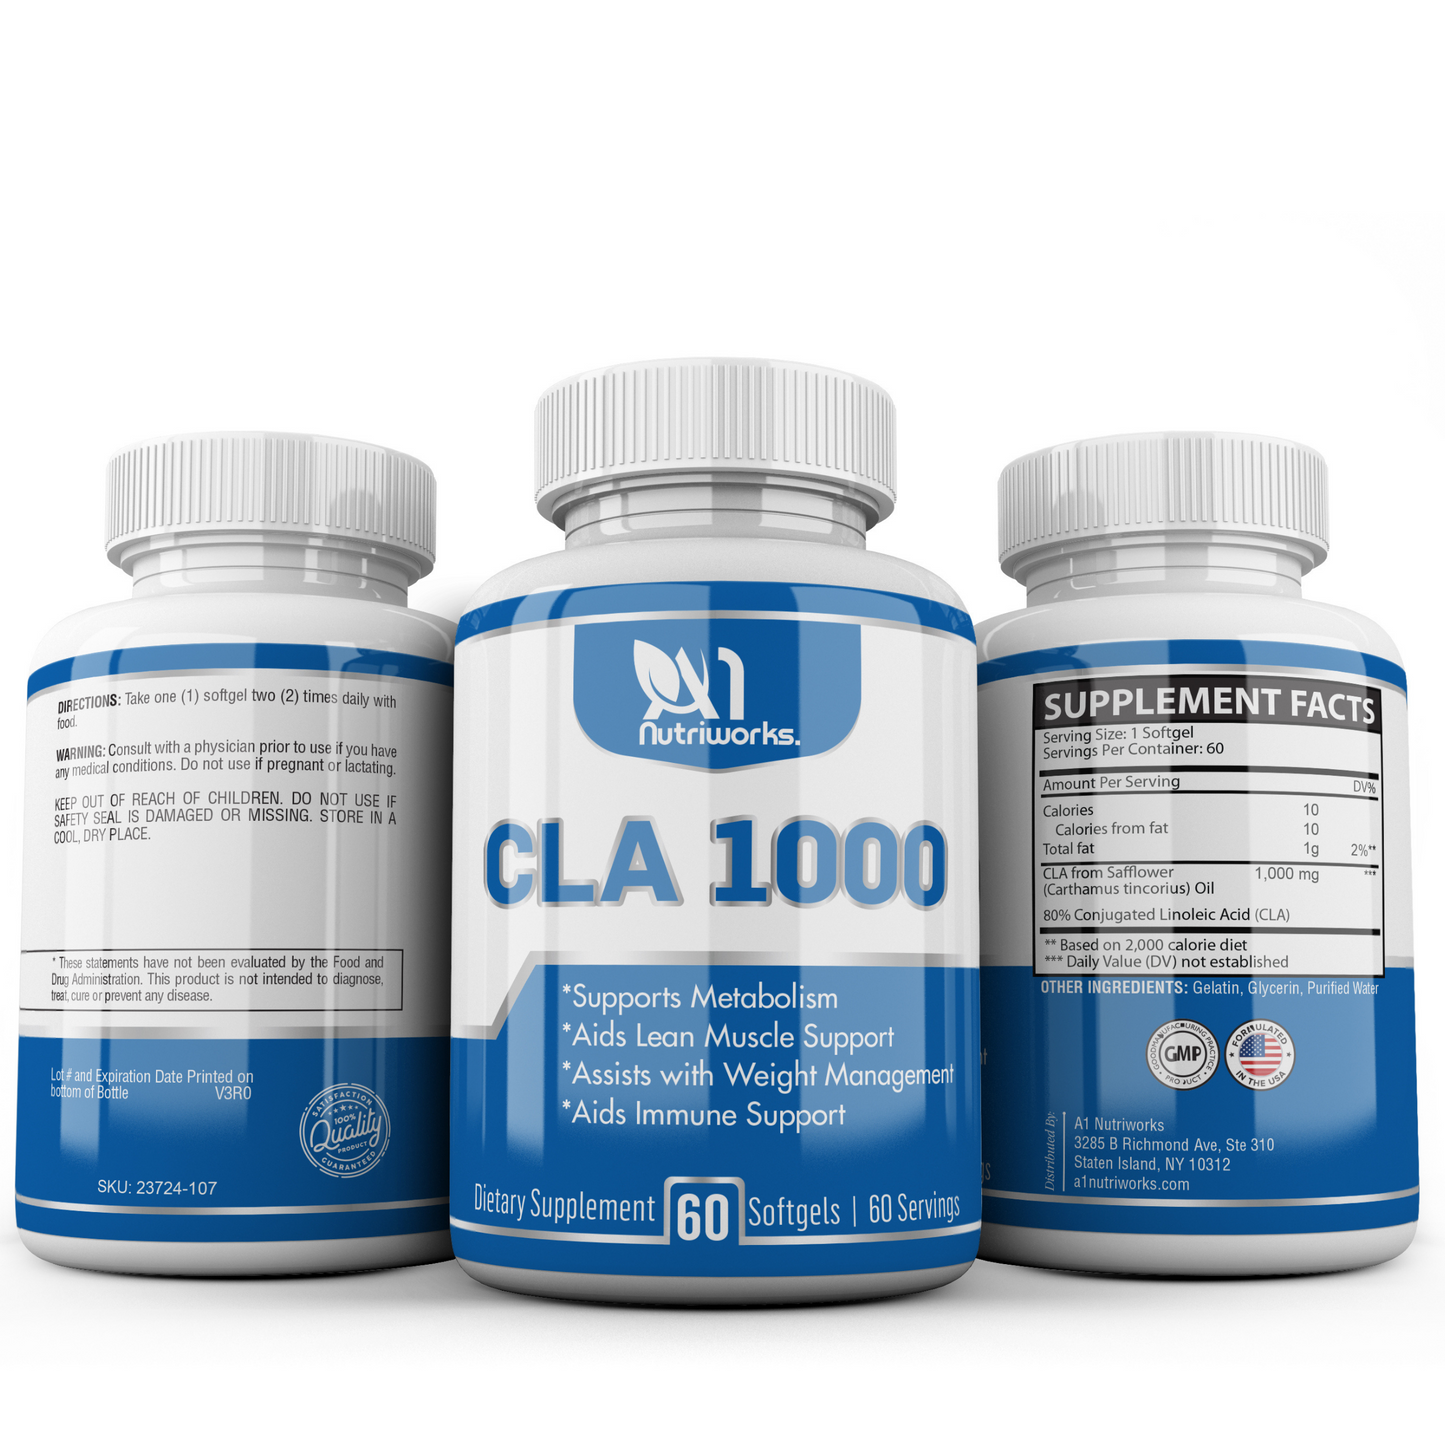 CLA 1000, Conjugated Linoleic Acid, Weight Loss Supplement, Metabolism Support, Stimulant-Free 2 Month Supply